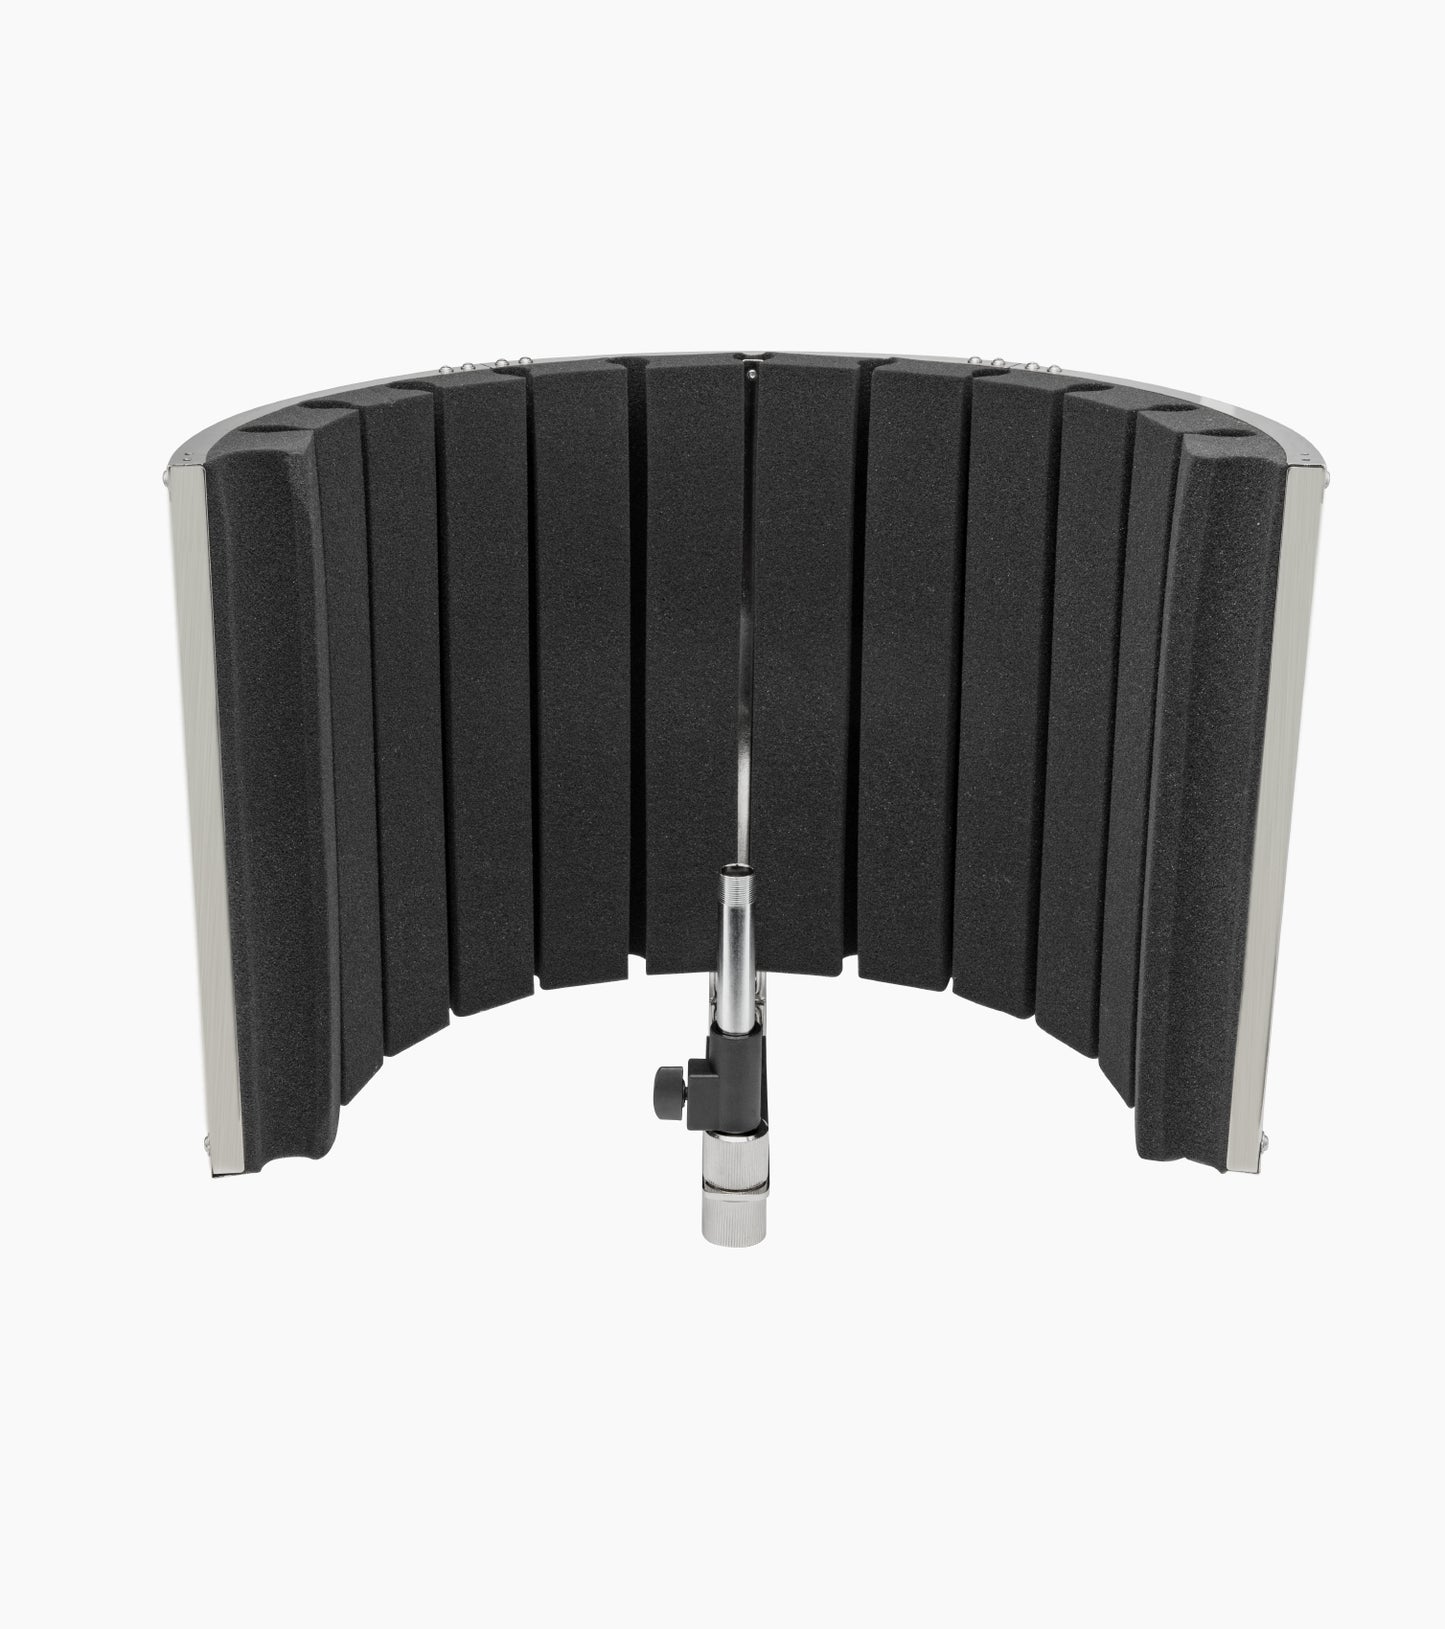 VRI-20 sound absorbing vocal shield frontal view 